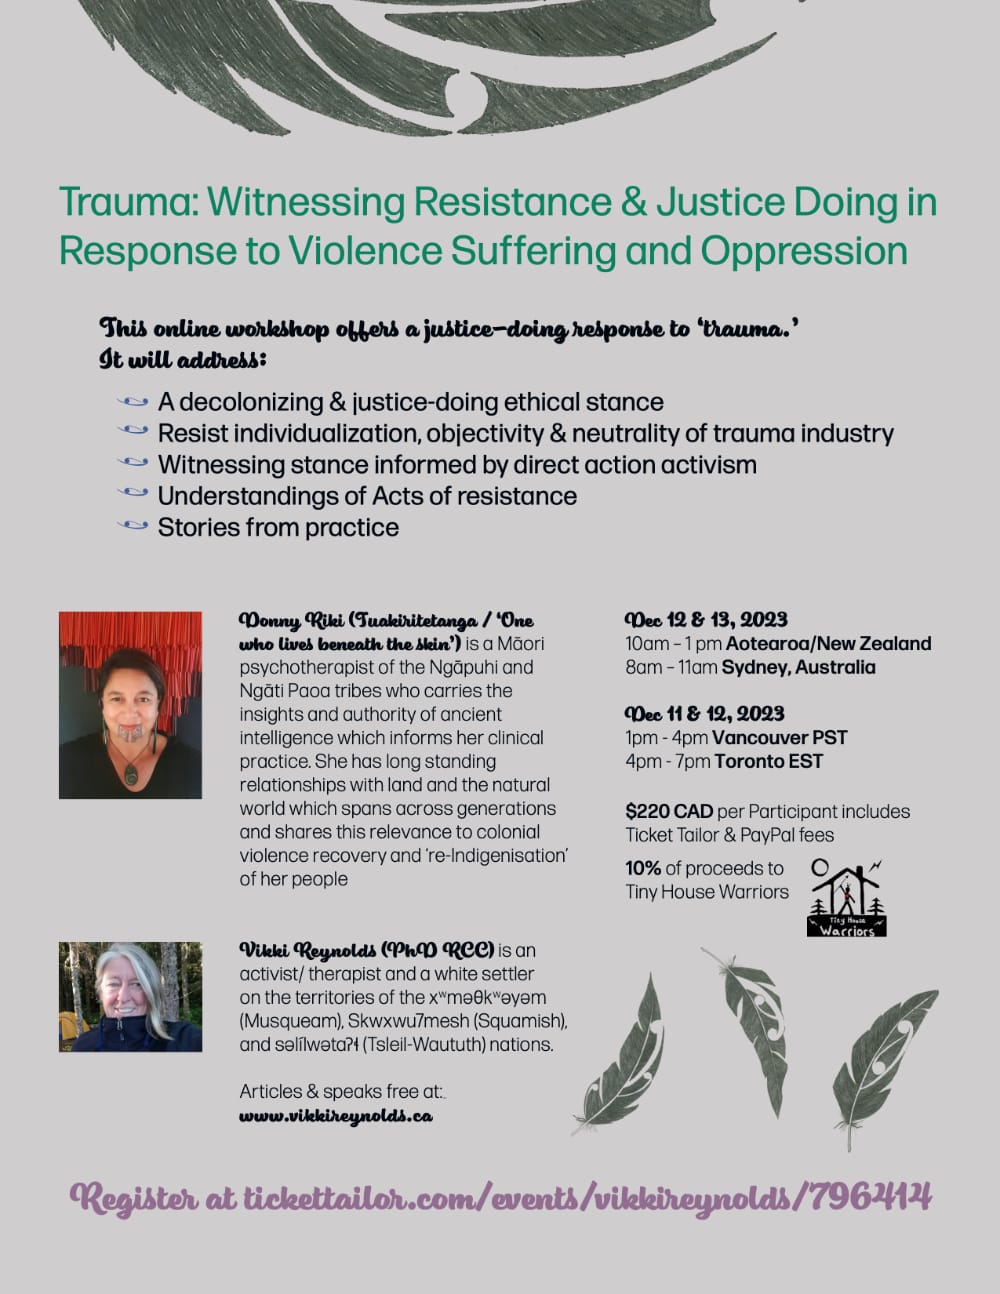   Trauma: Witnessing Resistance & Justice Doing in Response to Violence Suffering and Oppression